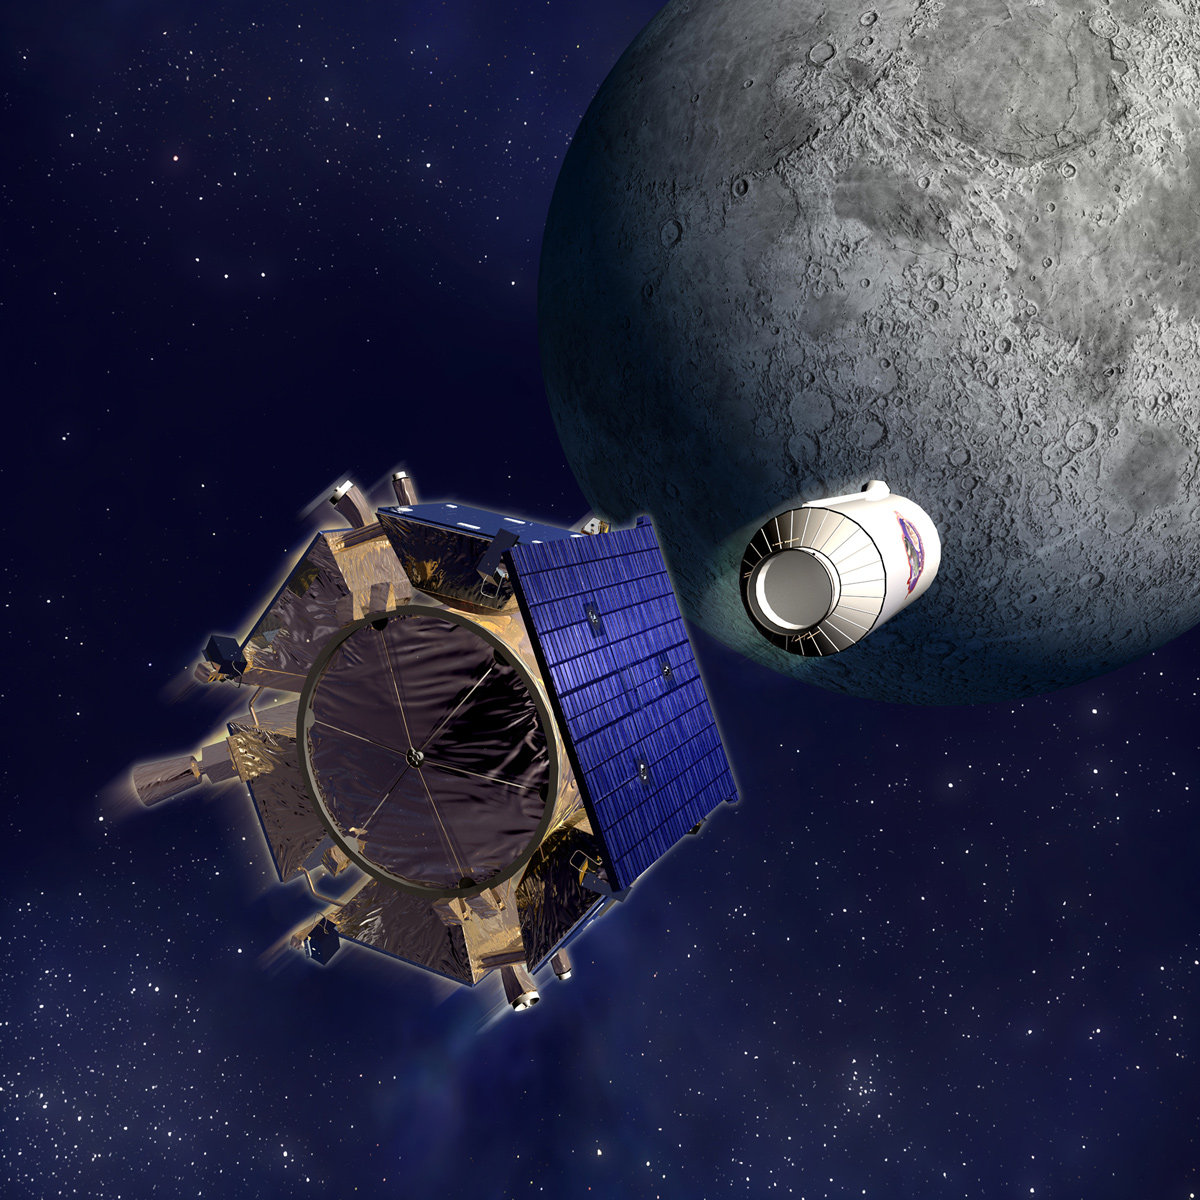 Illustration of two spacecraft flying toward the moon